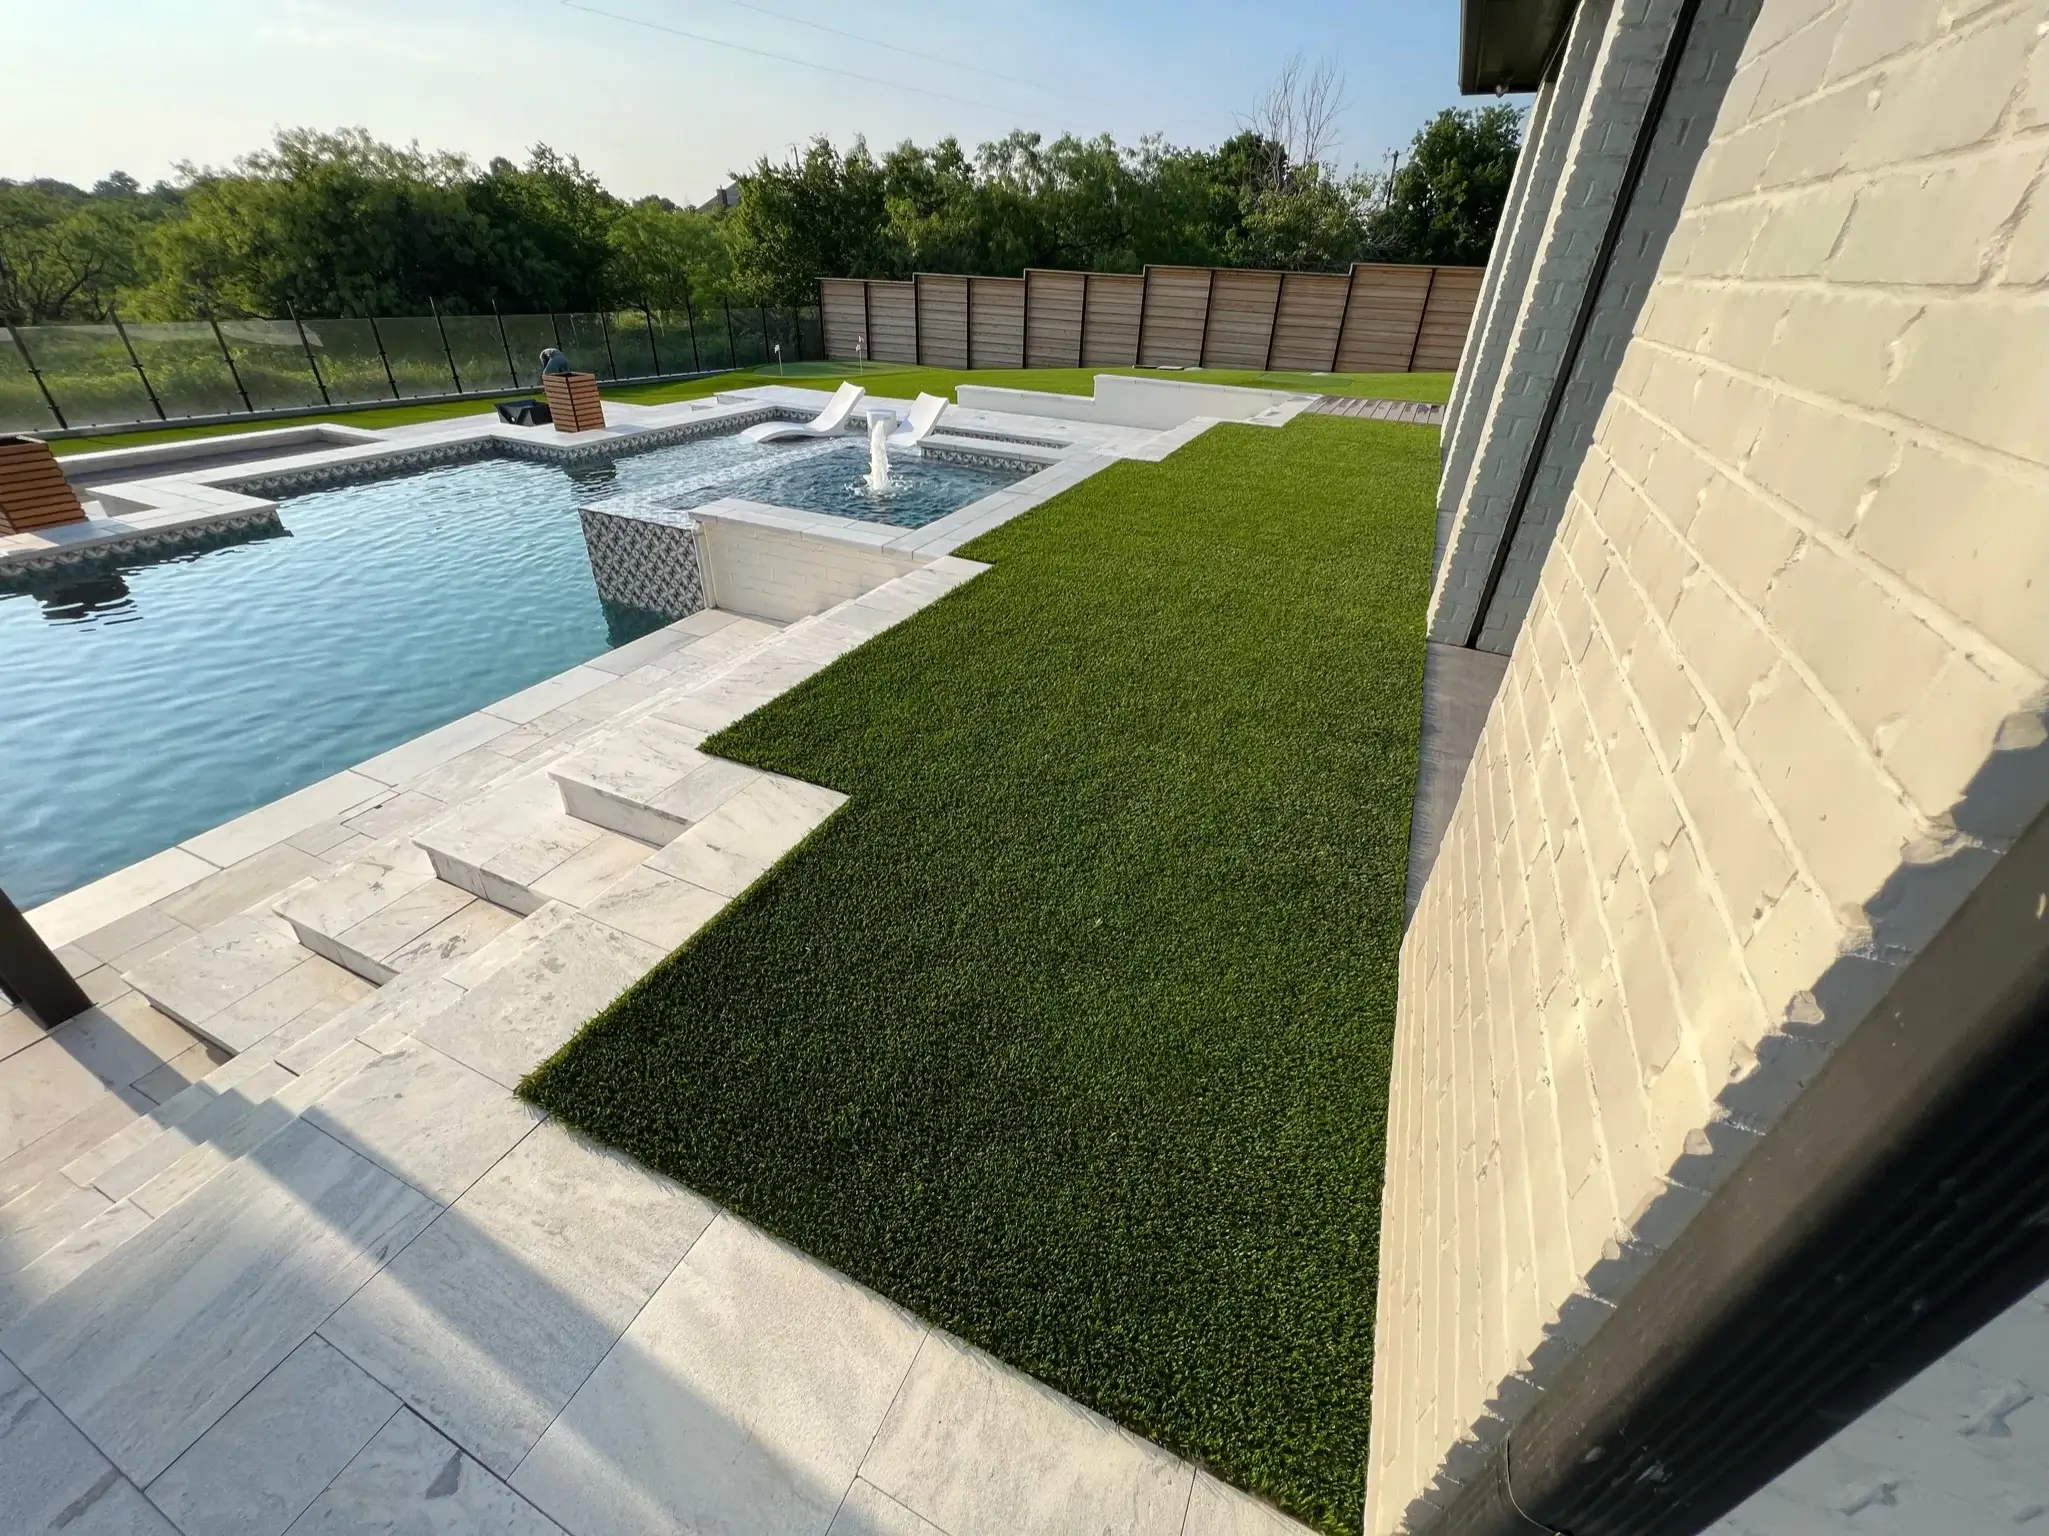 Elegant backyard with a rectangular swimming pool and marble coping, artificial grass lawn, and privacy fence in a suburban setting with the house's exterior wall in view.